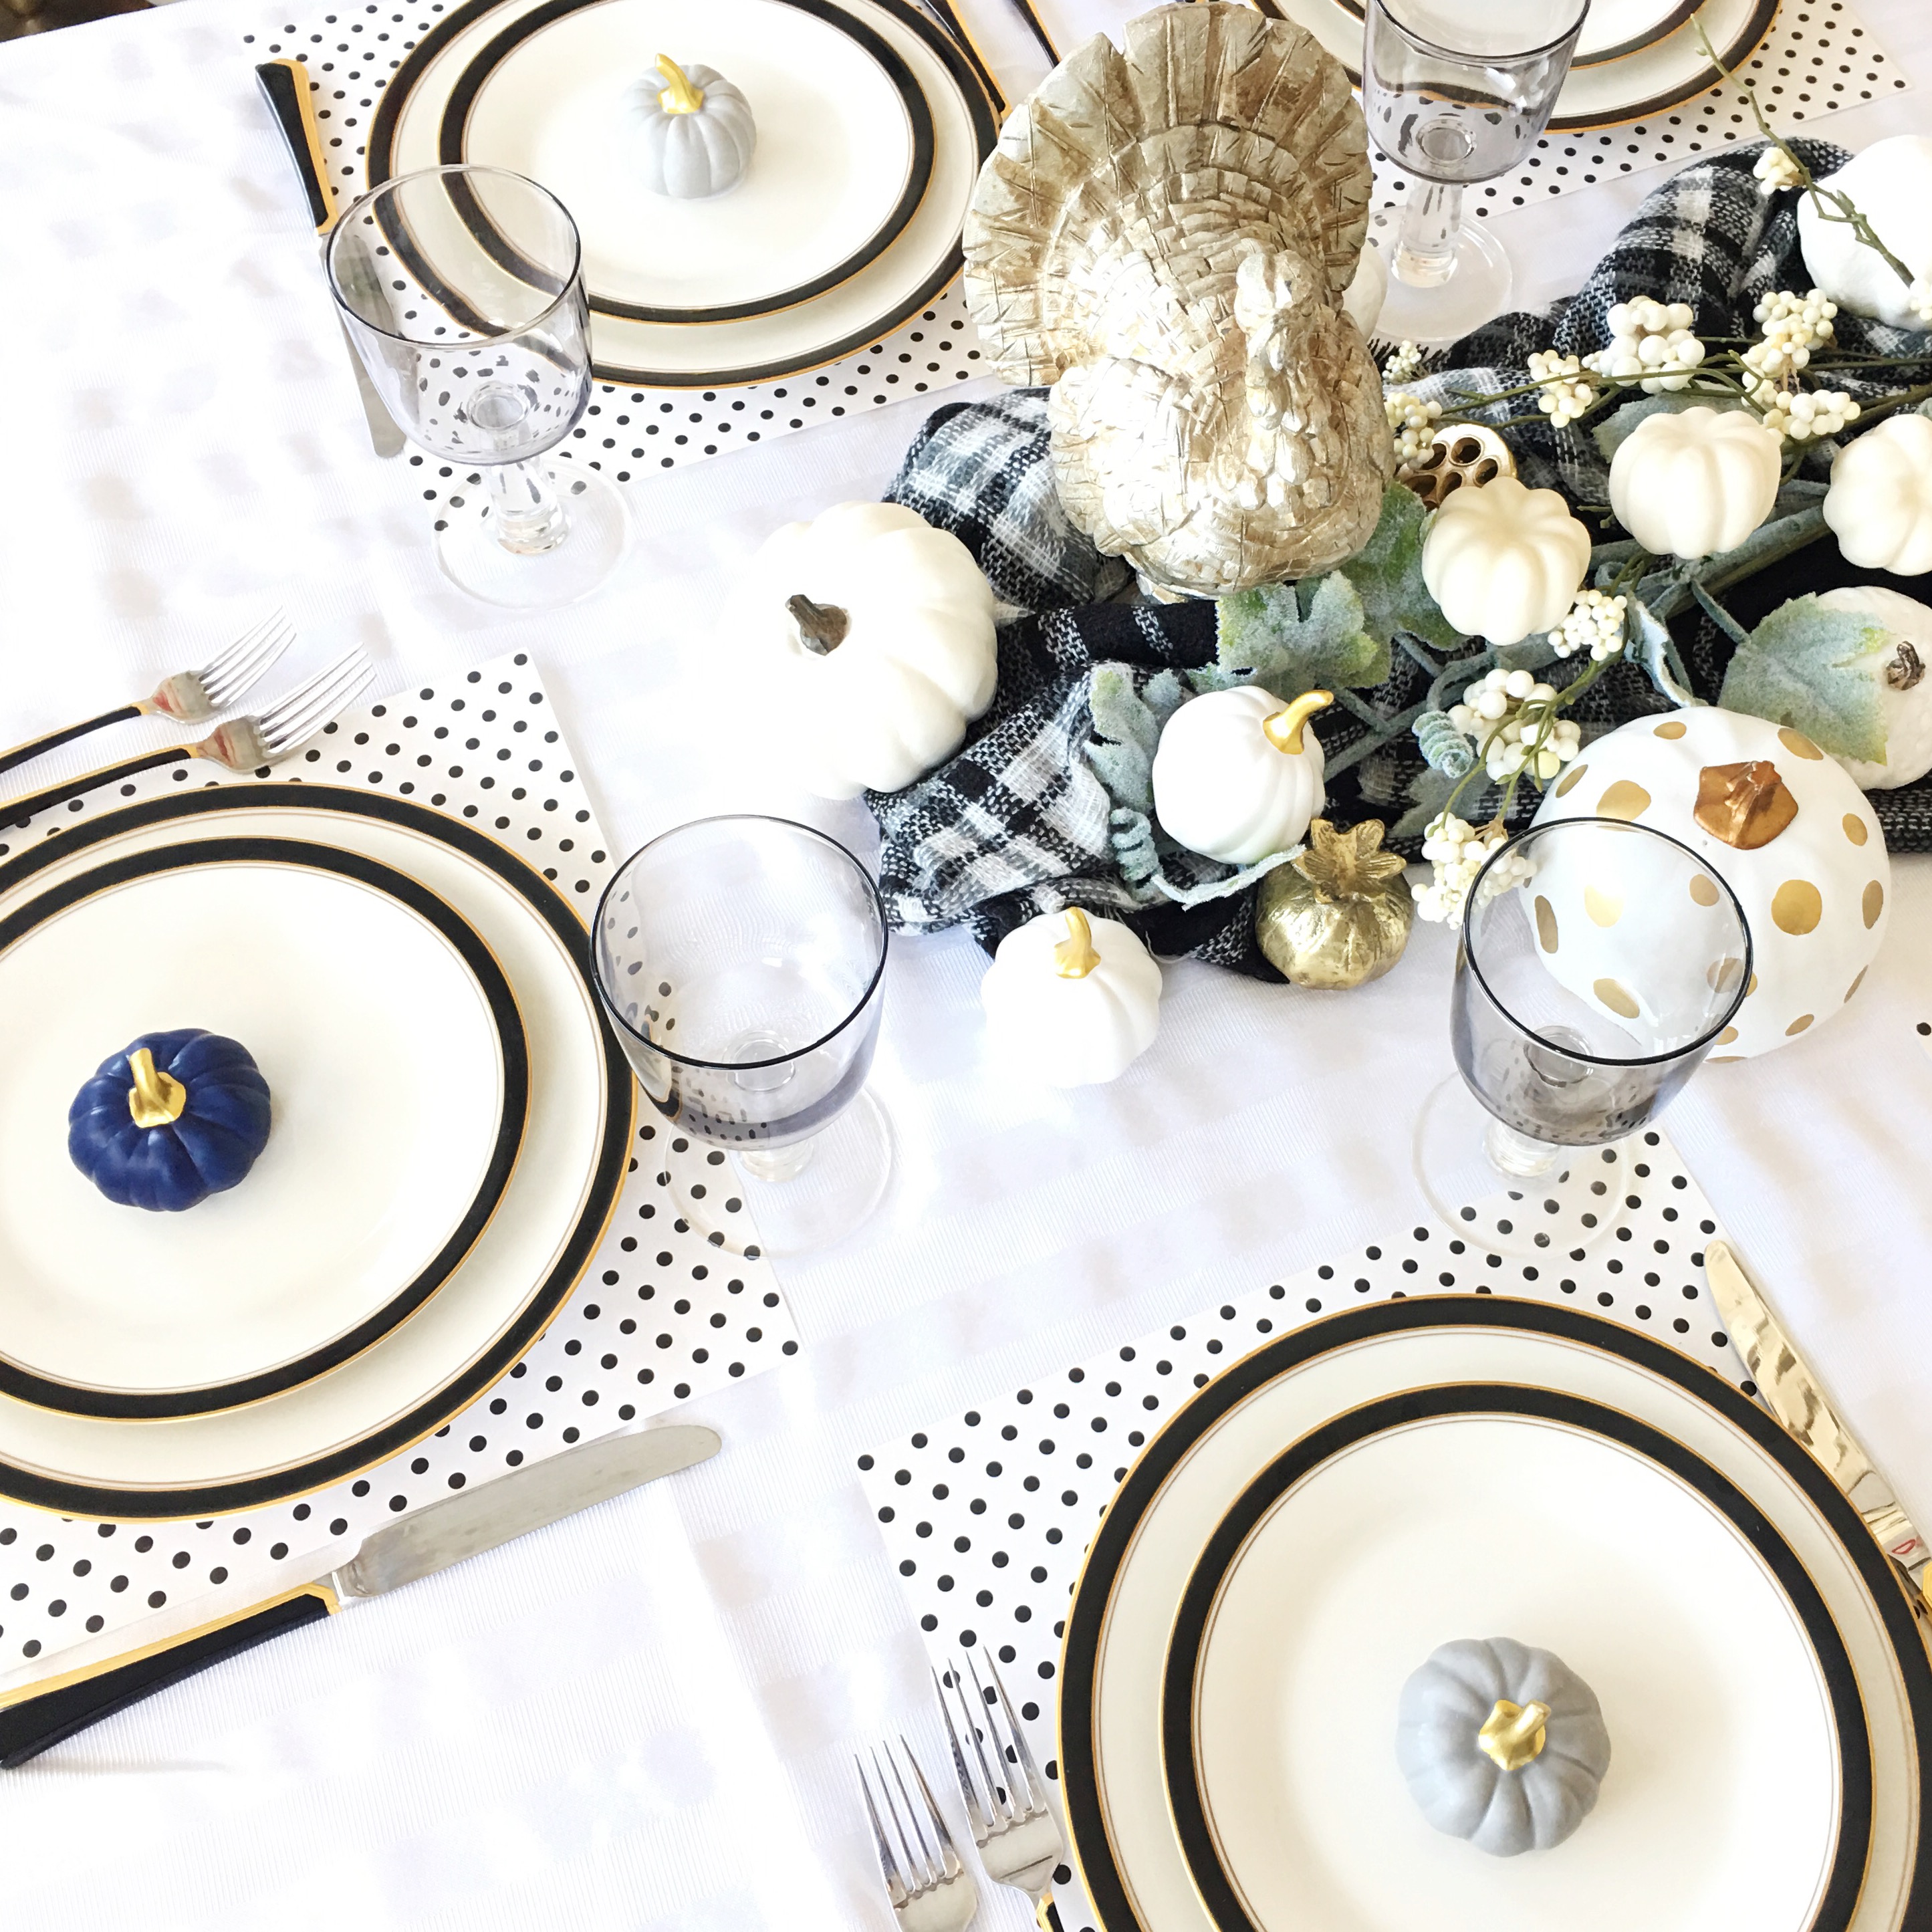 modern thanksgiving table-setting, table setting, tablescape, Thanksgiving table, thanksgiving centerpieces, fall tablsetting, fall tablescape, dinner party, modern tablescapes, blanket scarves, fun table center pieces, how to set a fun fall table, wedding china, black and white tablesetting, farmhouse tablesetting, farmhouse, Thanksgiving table, studio 5,